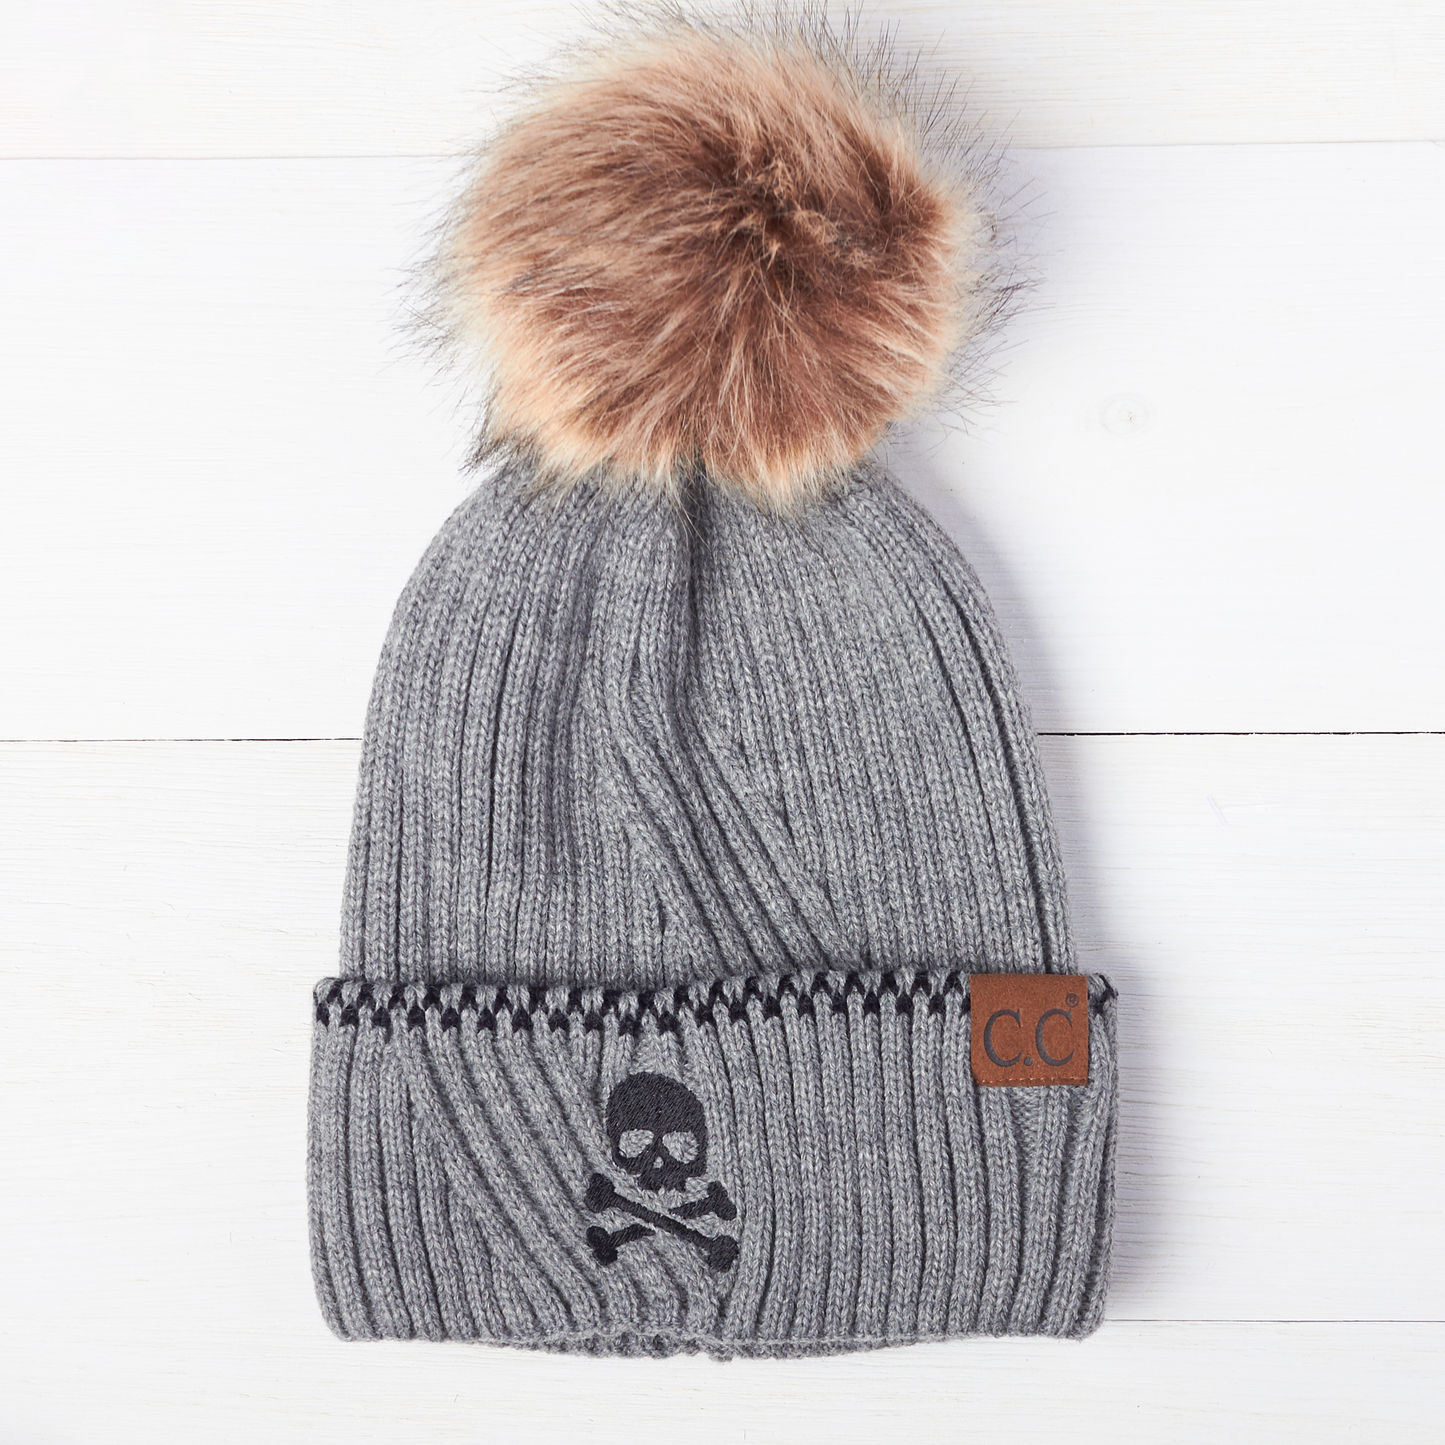 Skull & Crossbones Ribbed Knit Beanie With Accented Cuff